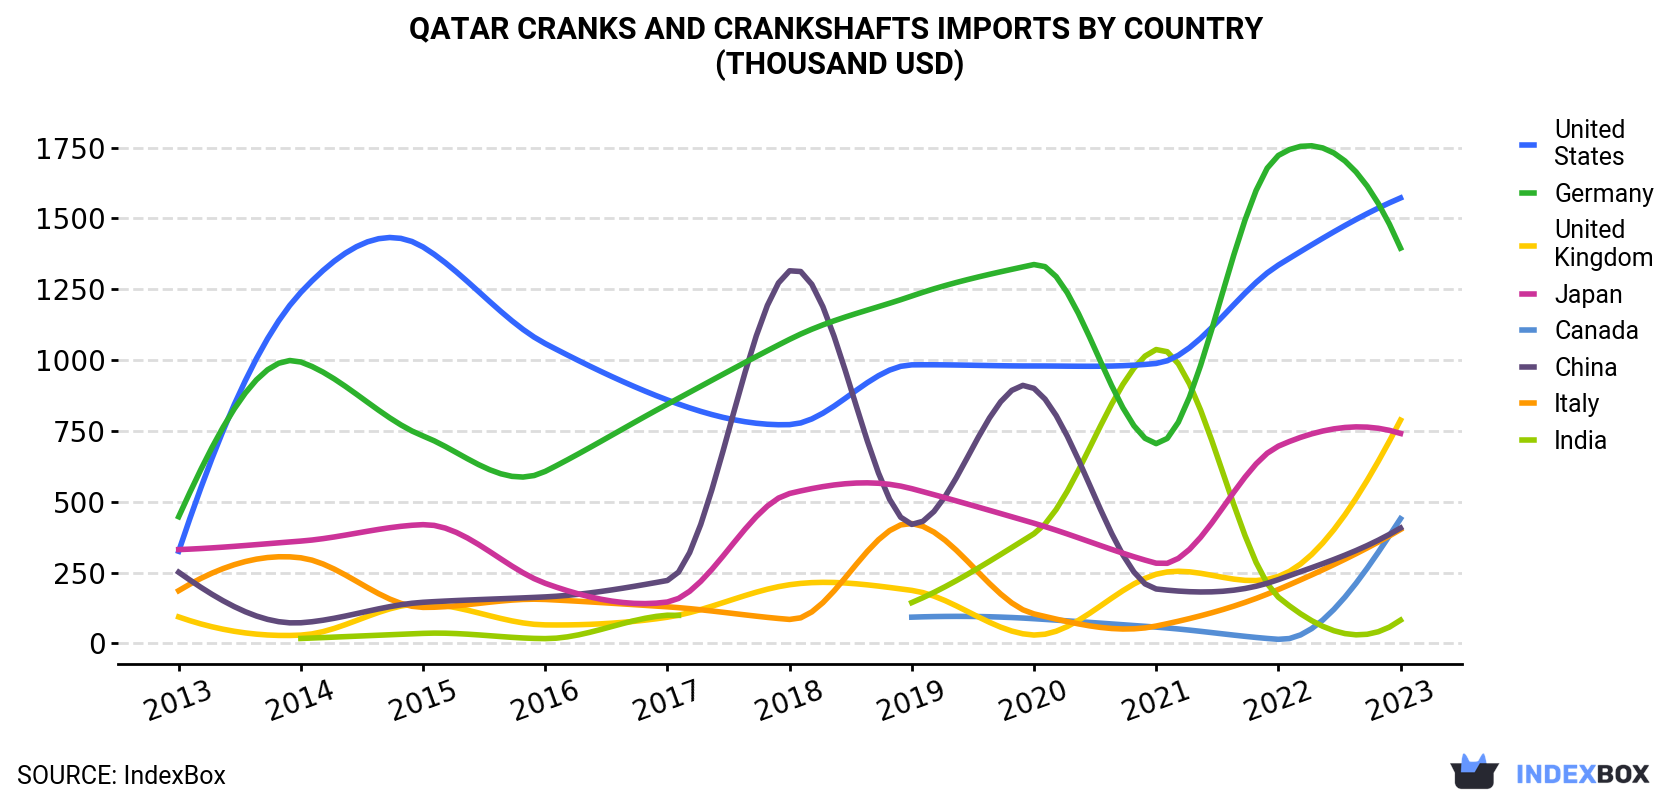 Qatar Cranks And Crankshafts Imports By Country (Thousand USD)